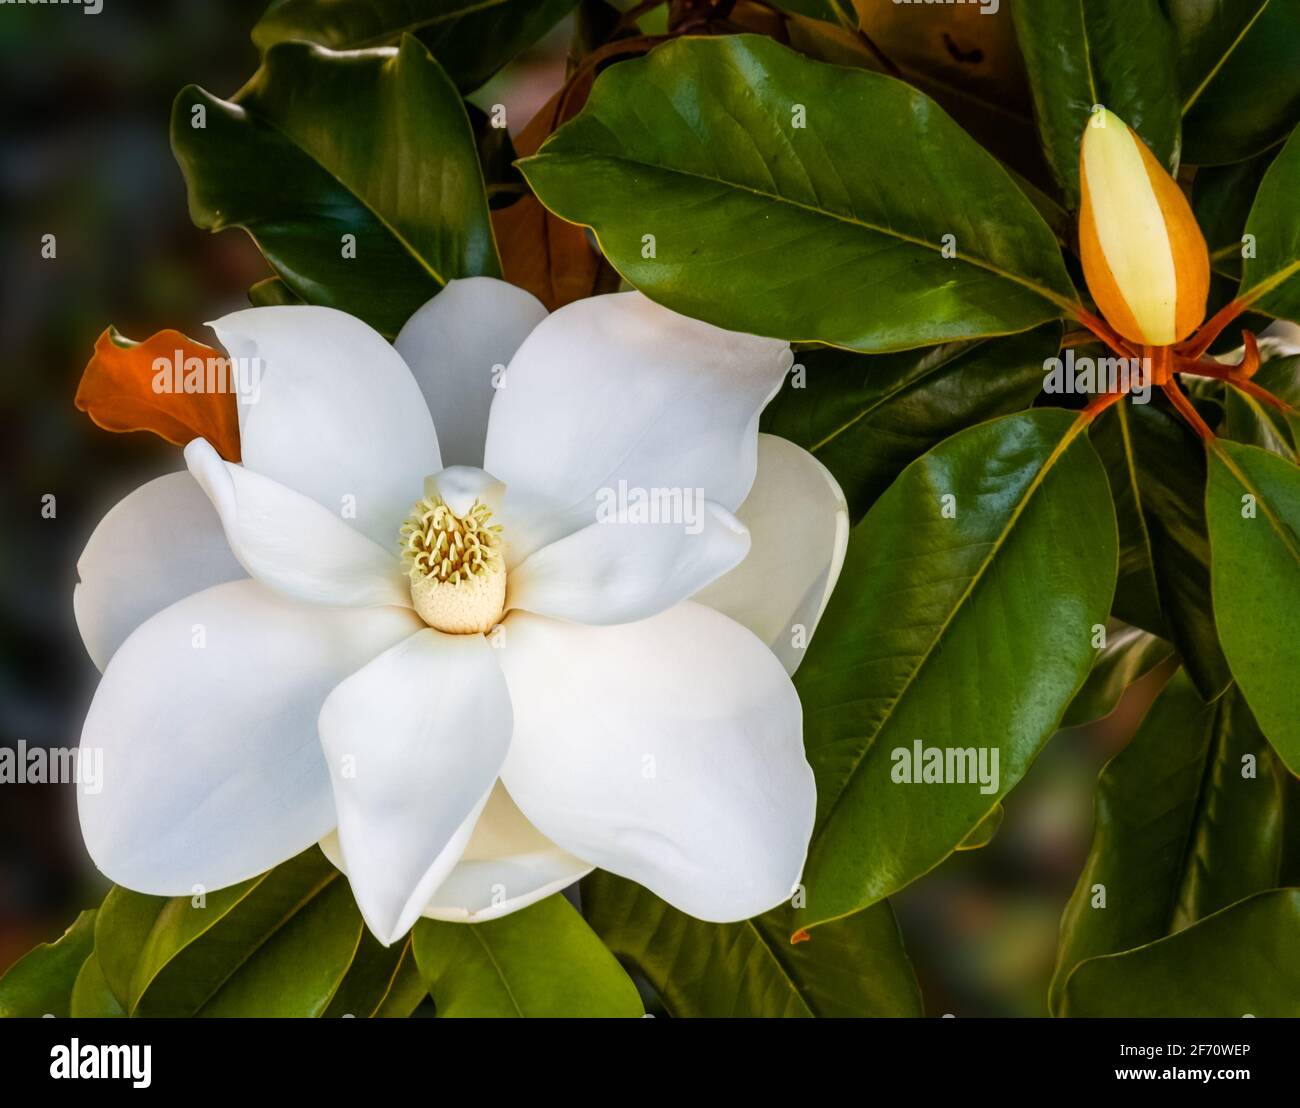 magnolia flowers in a tree closeup vibrant colors and blurred background Stock Photo